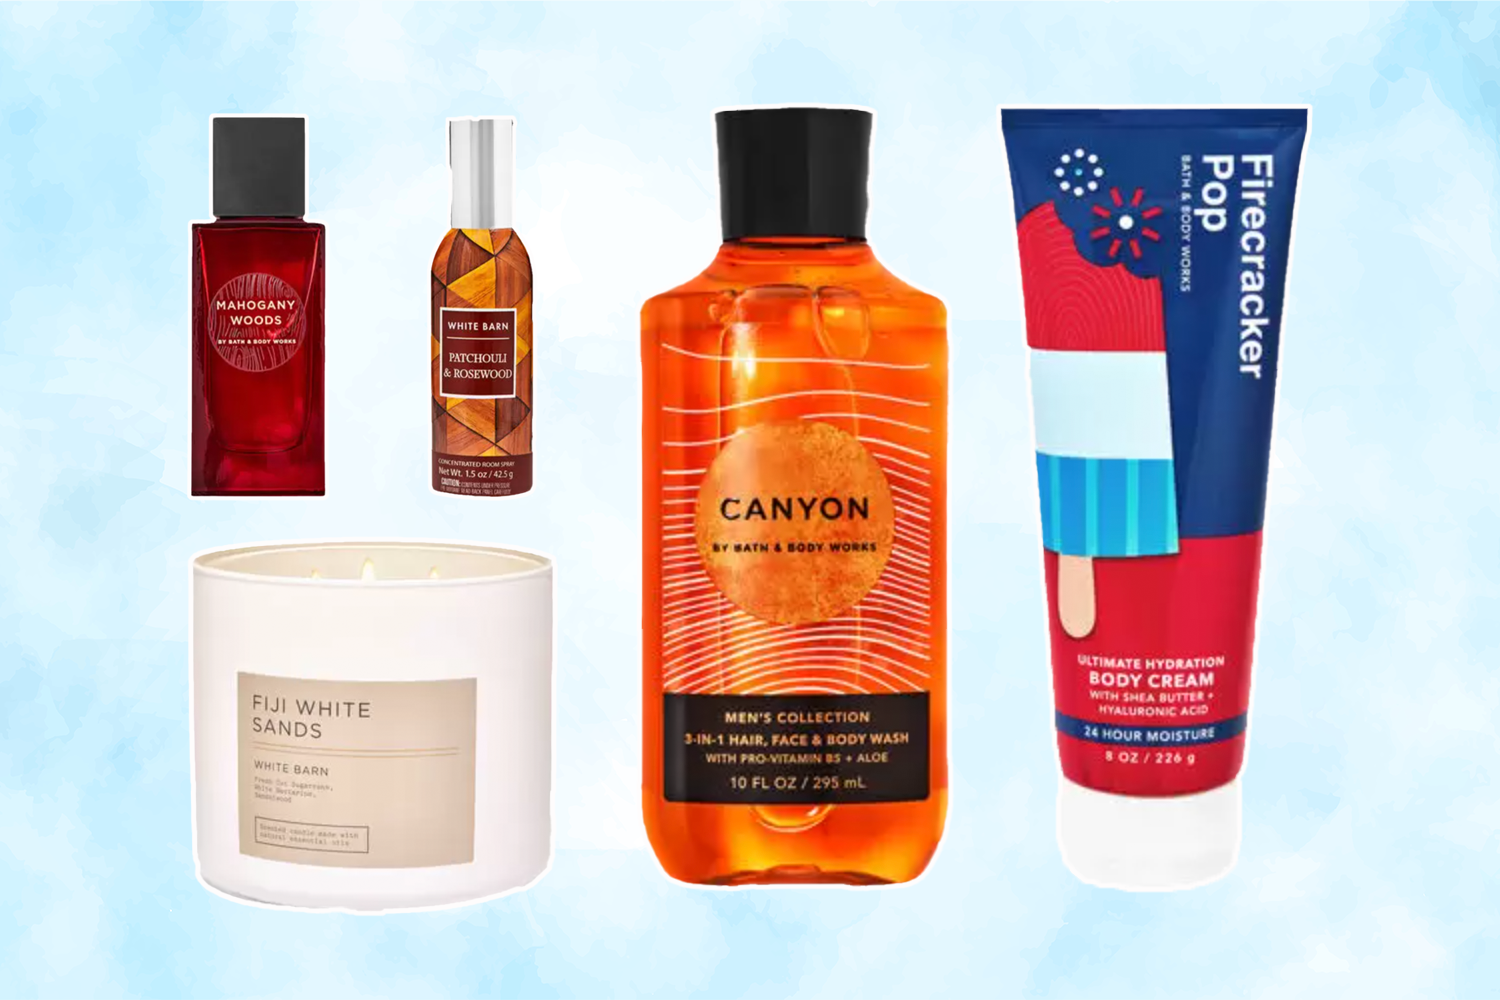 Bath & Body Works has some great Father's Day gifting options